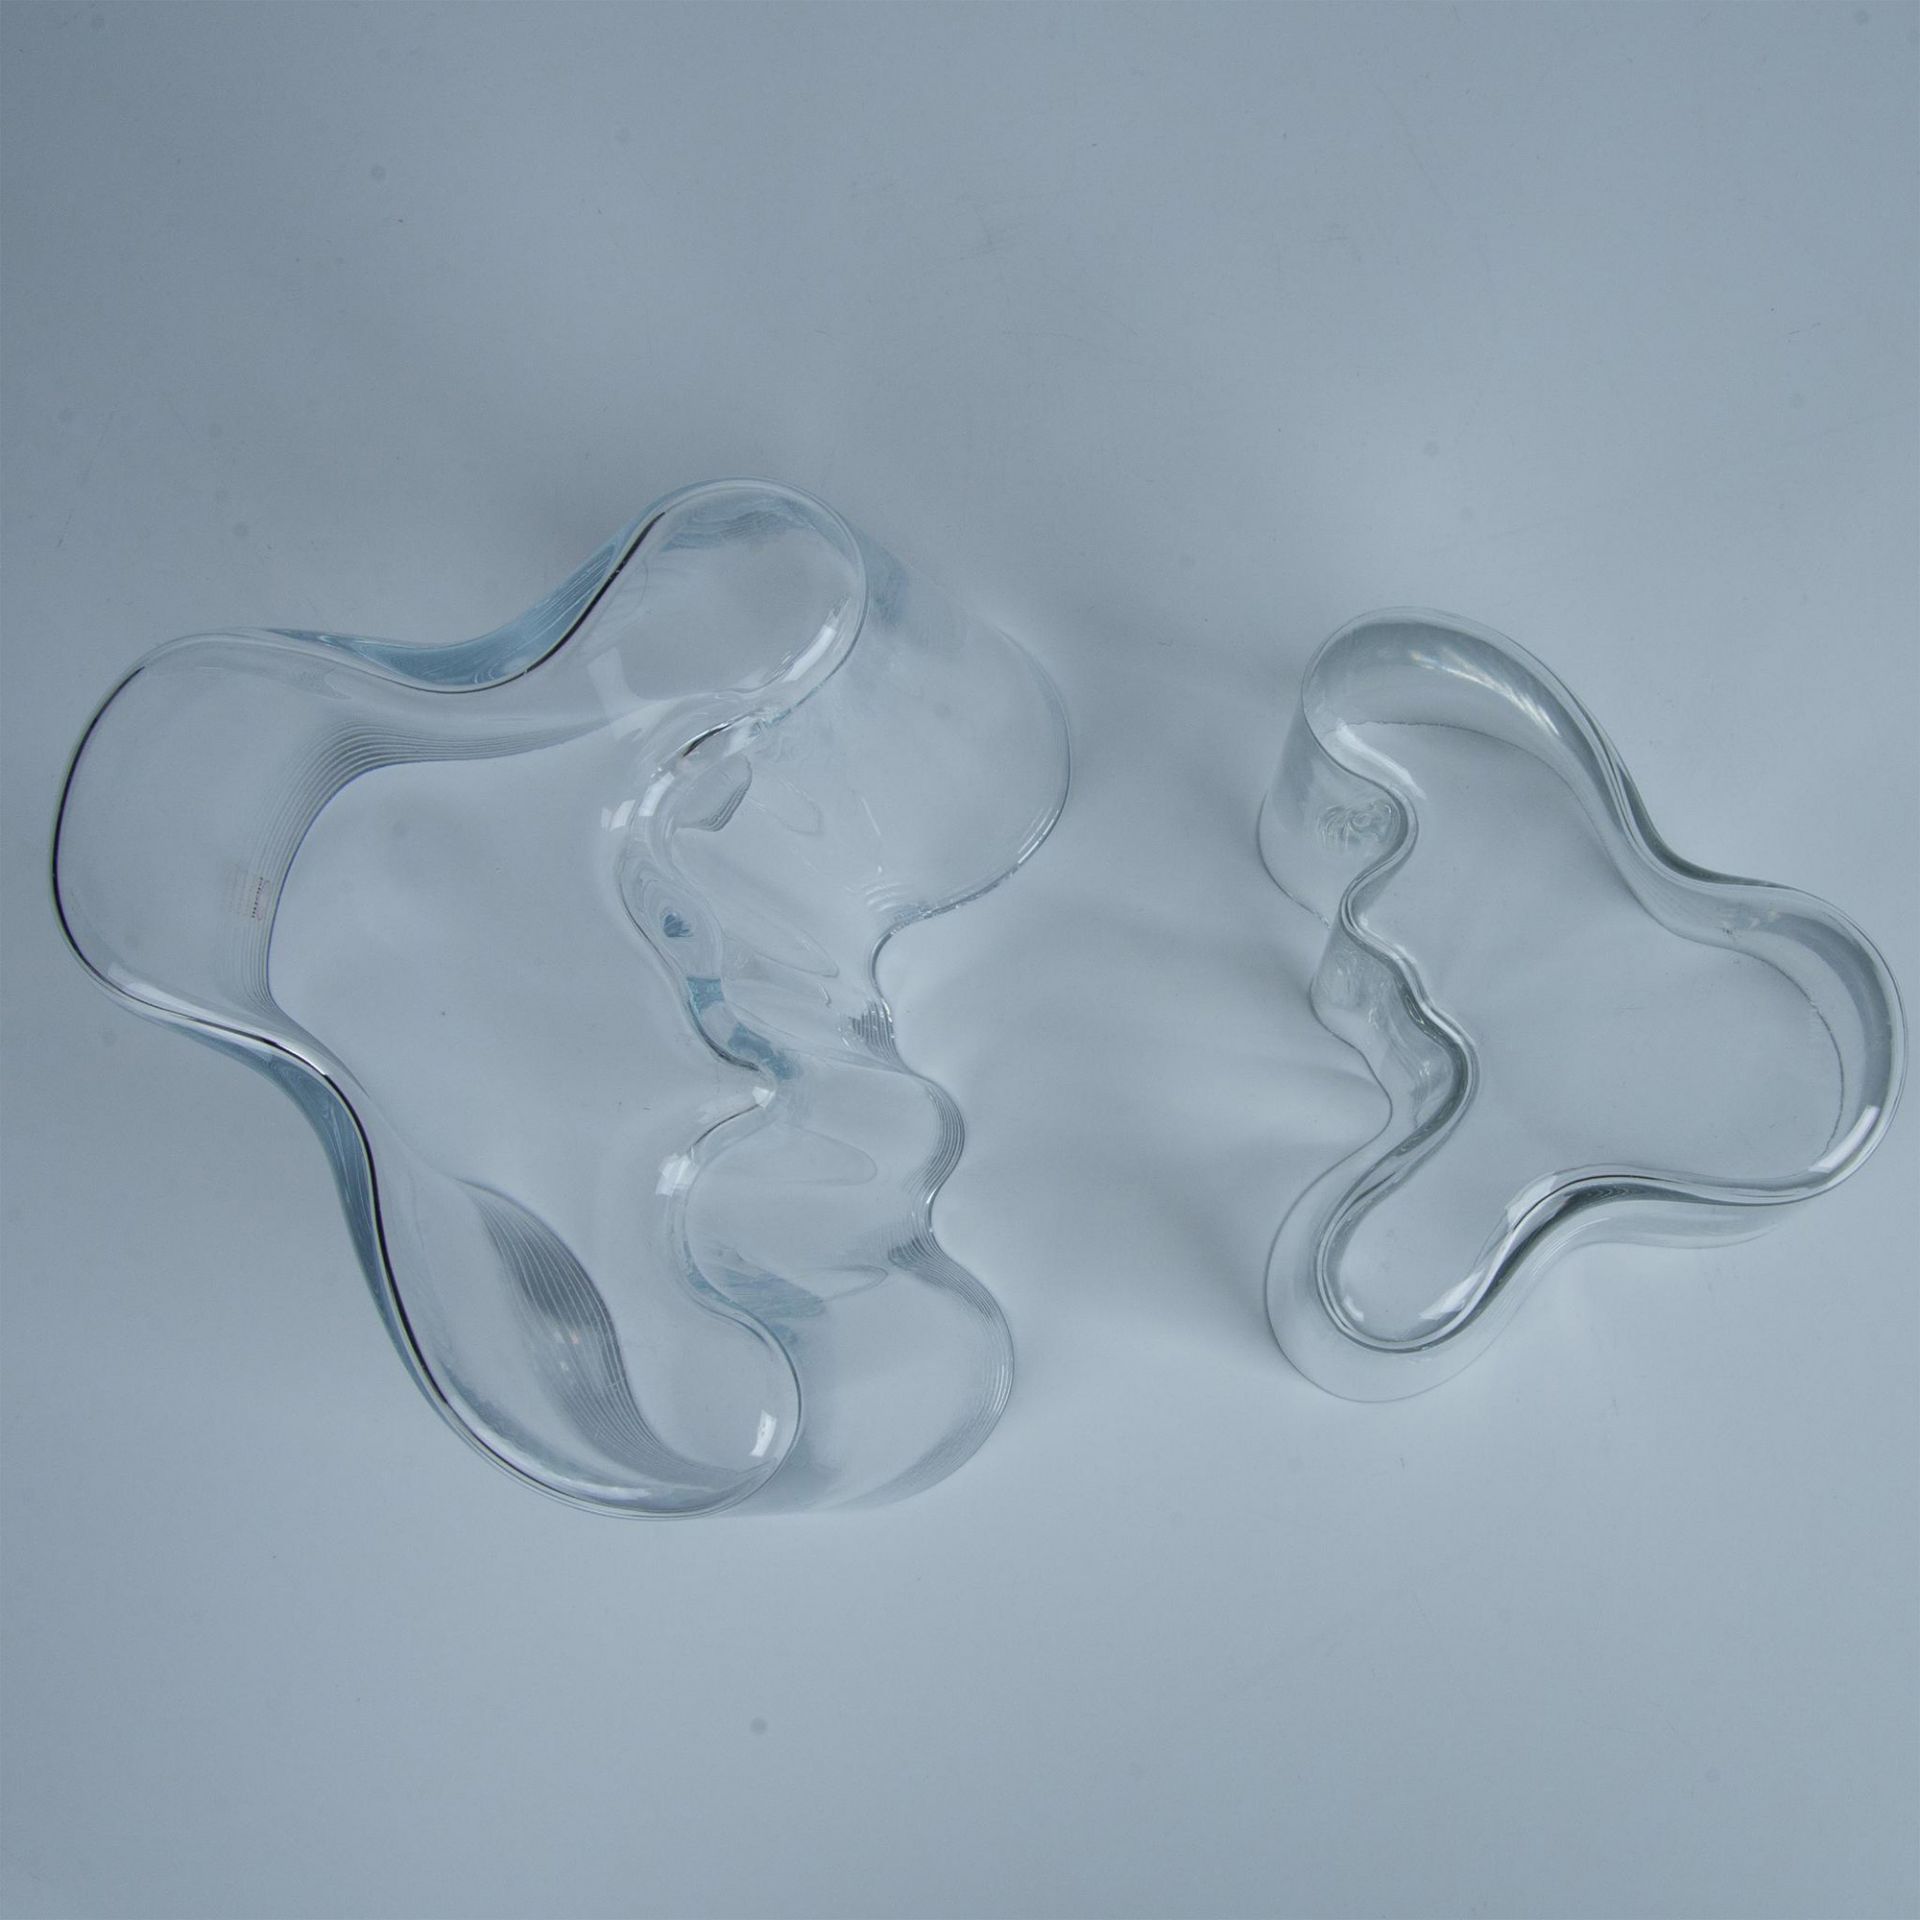 2pc Iittala Clear Glass Vases, Alvar Aalto Collection - Image 4 of 5